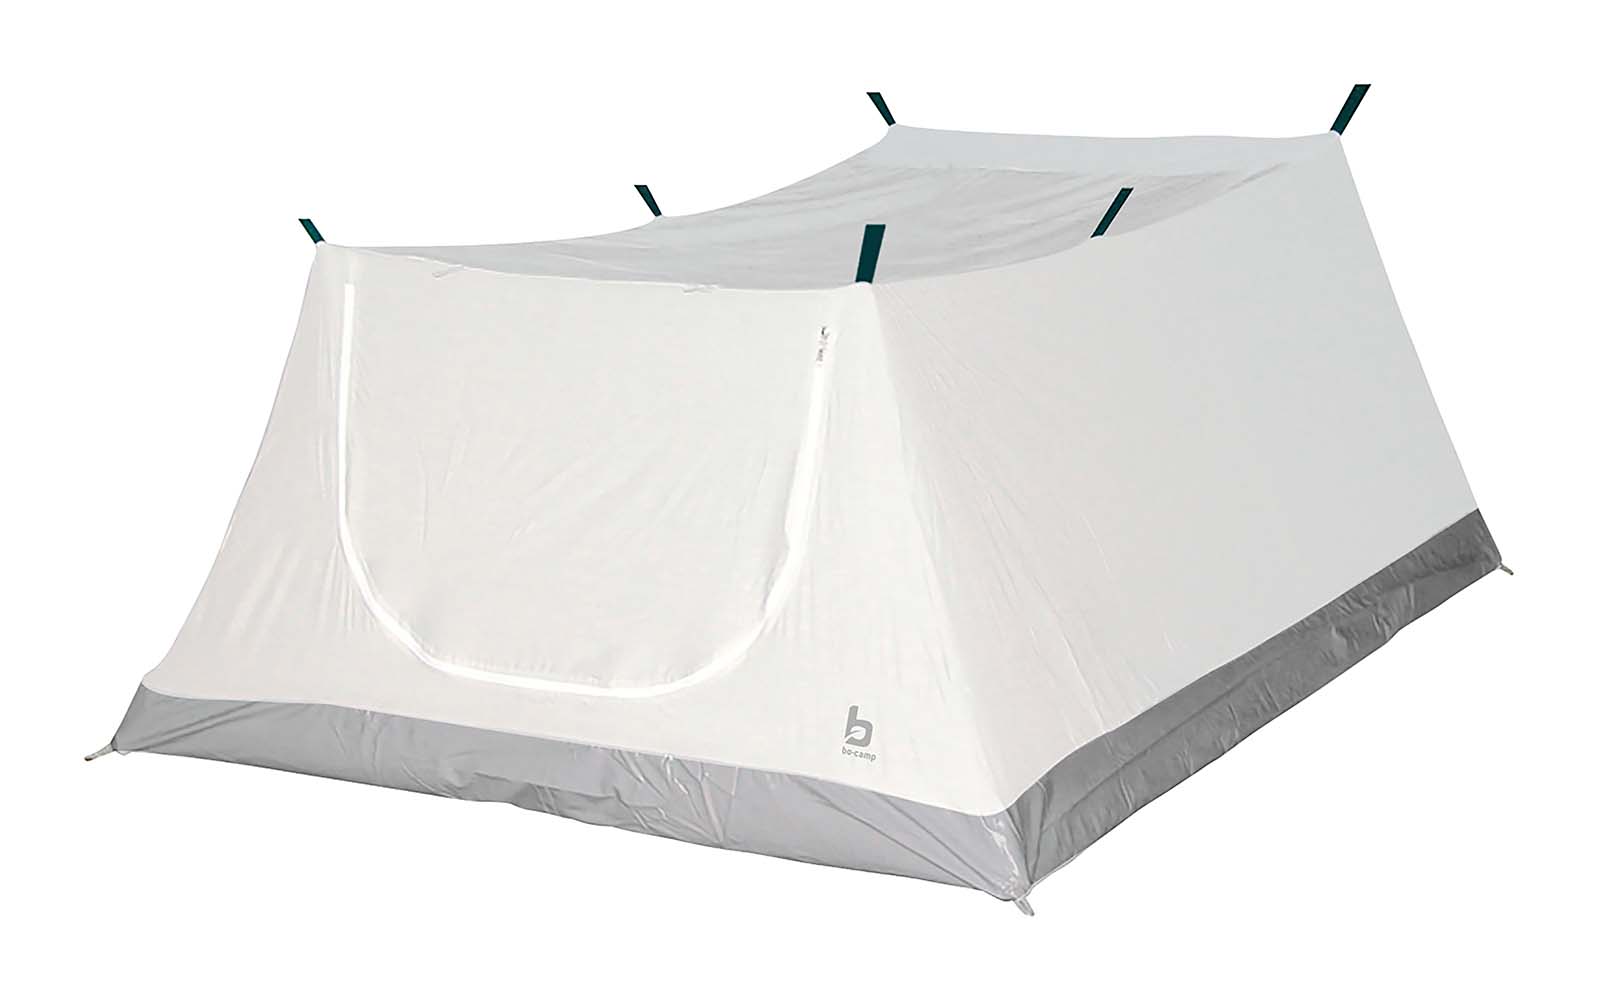 4471820 Universal sleeping cabin for under the folding trailer. Quick to create a sleeping area for 1 persons  and easy to attach to the tubes of the folding trailer. This inner tent is made from breathable polyester with a waterproof ground sail. The tent also has ventilation mesh.